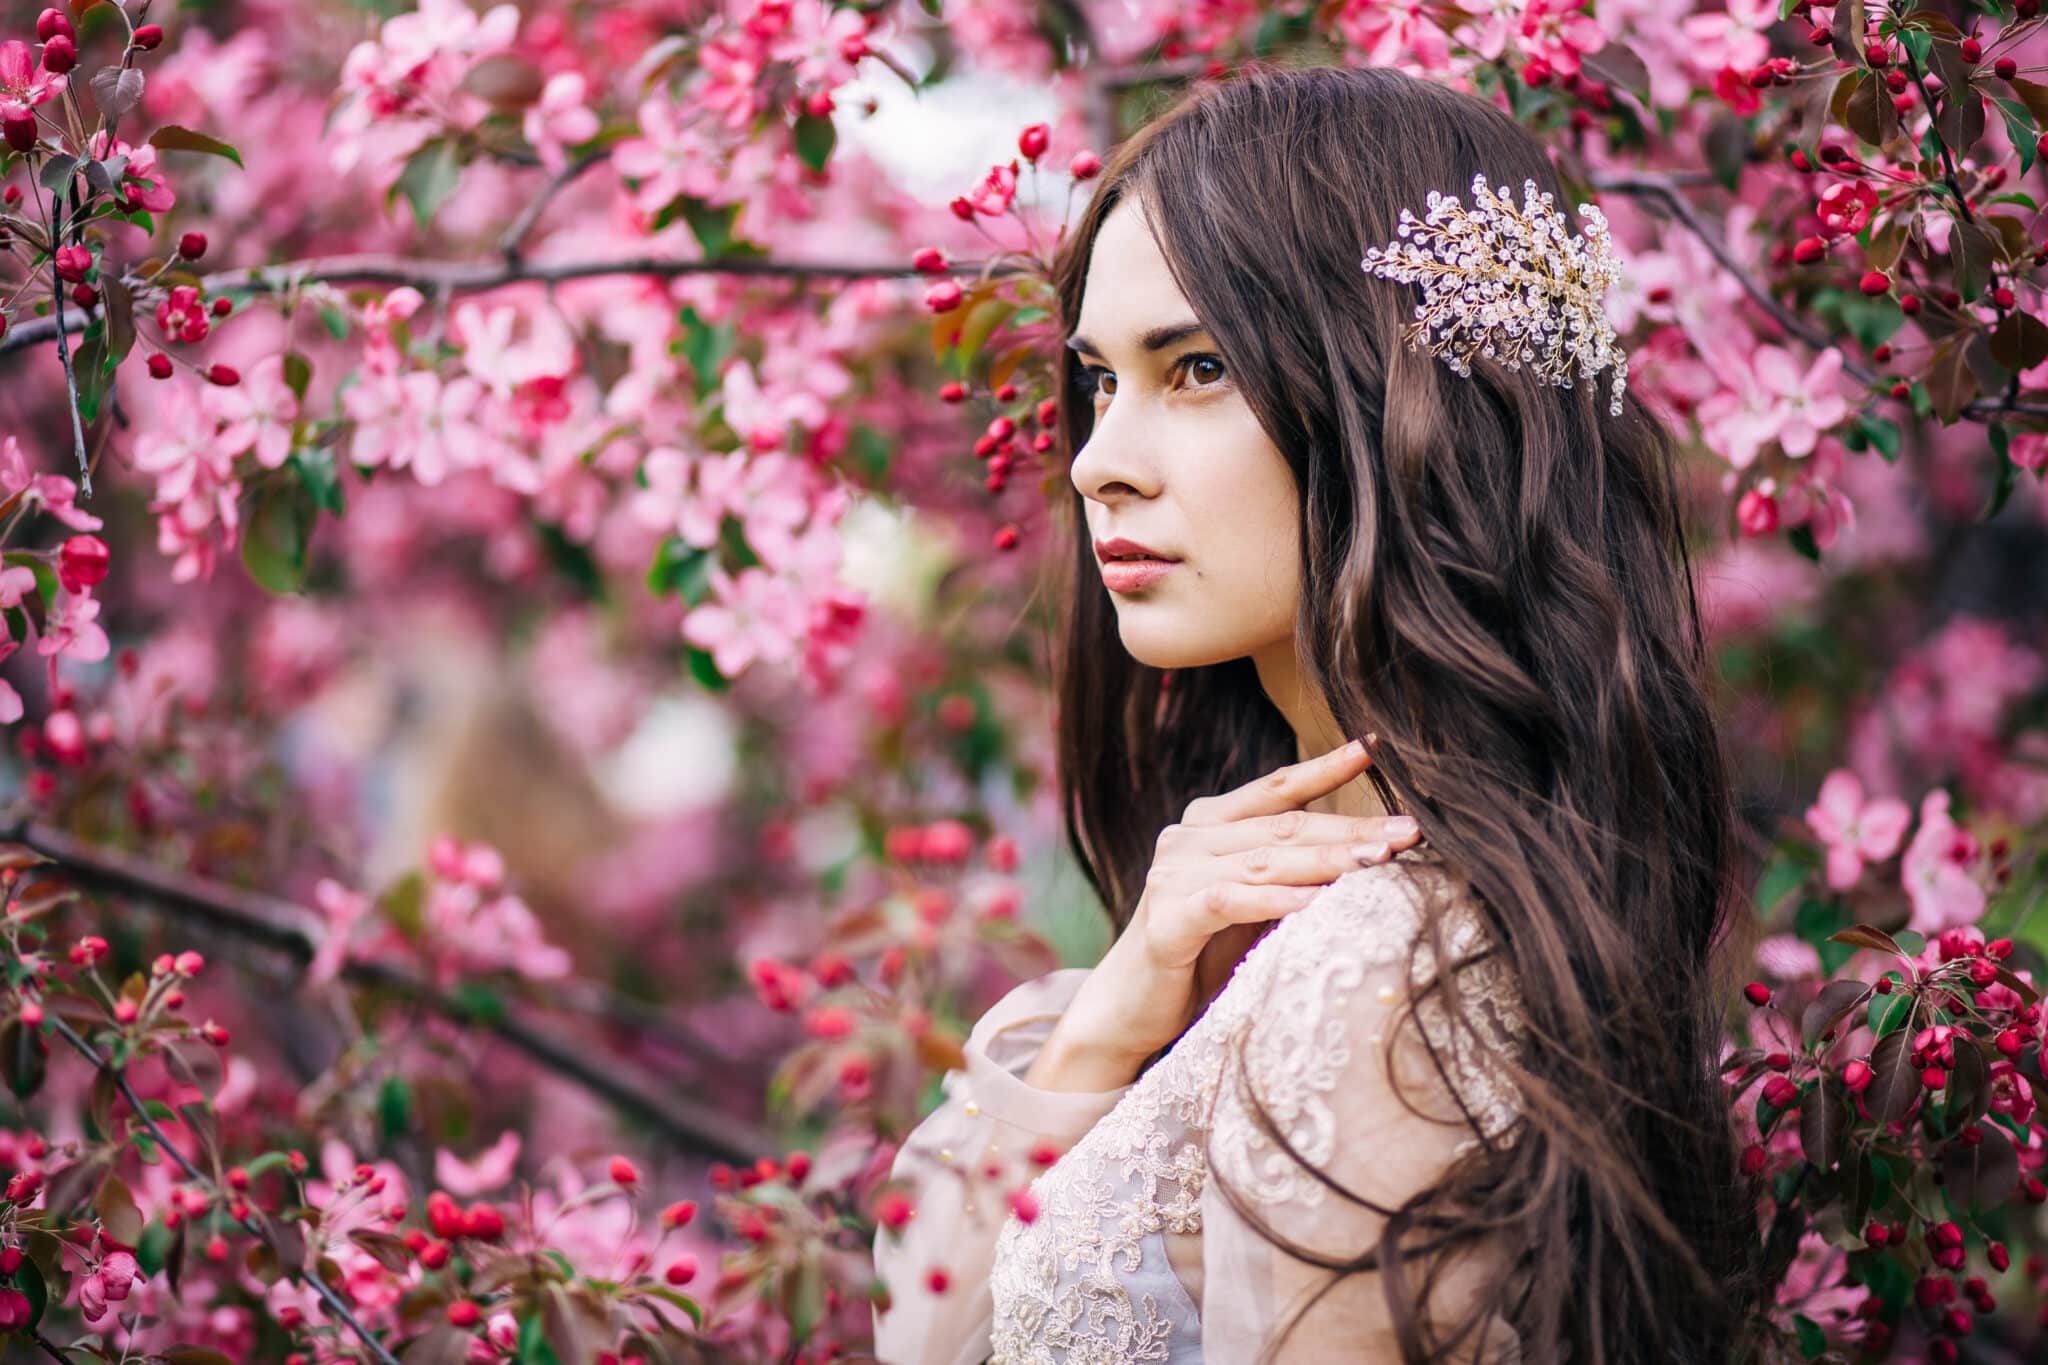 beautiful brunette girl in transparent dress, with decoration on the hair, near the tree blossoms with pink flowers